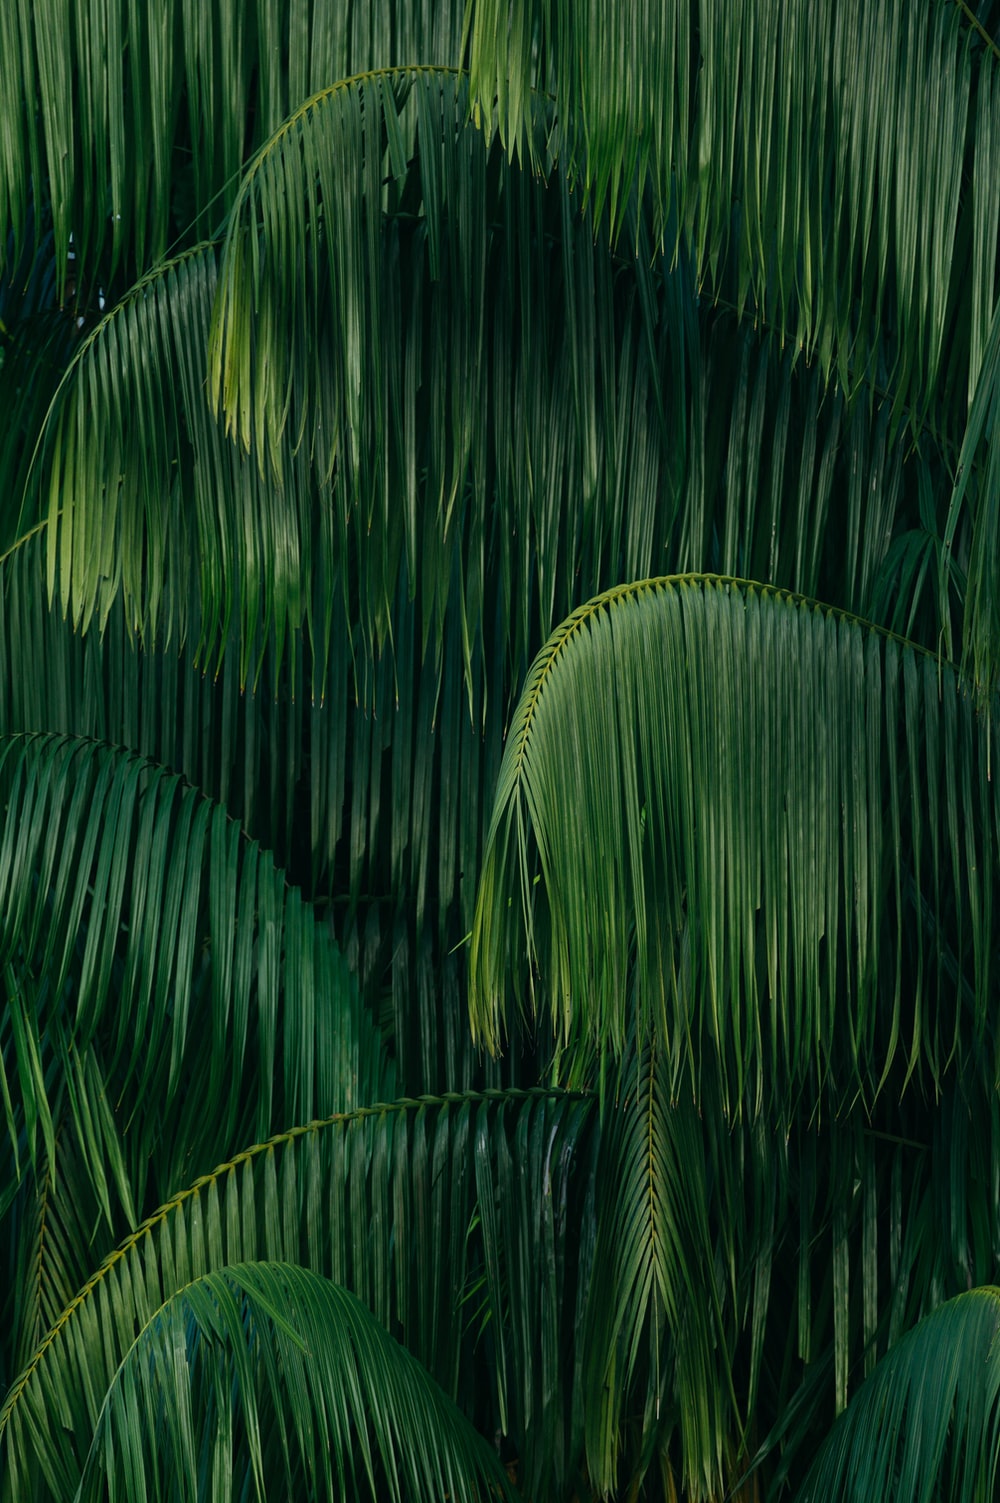 Green Jungle Picture. Download Free Image